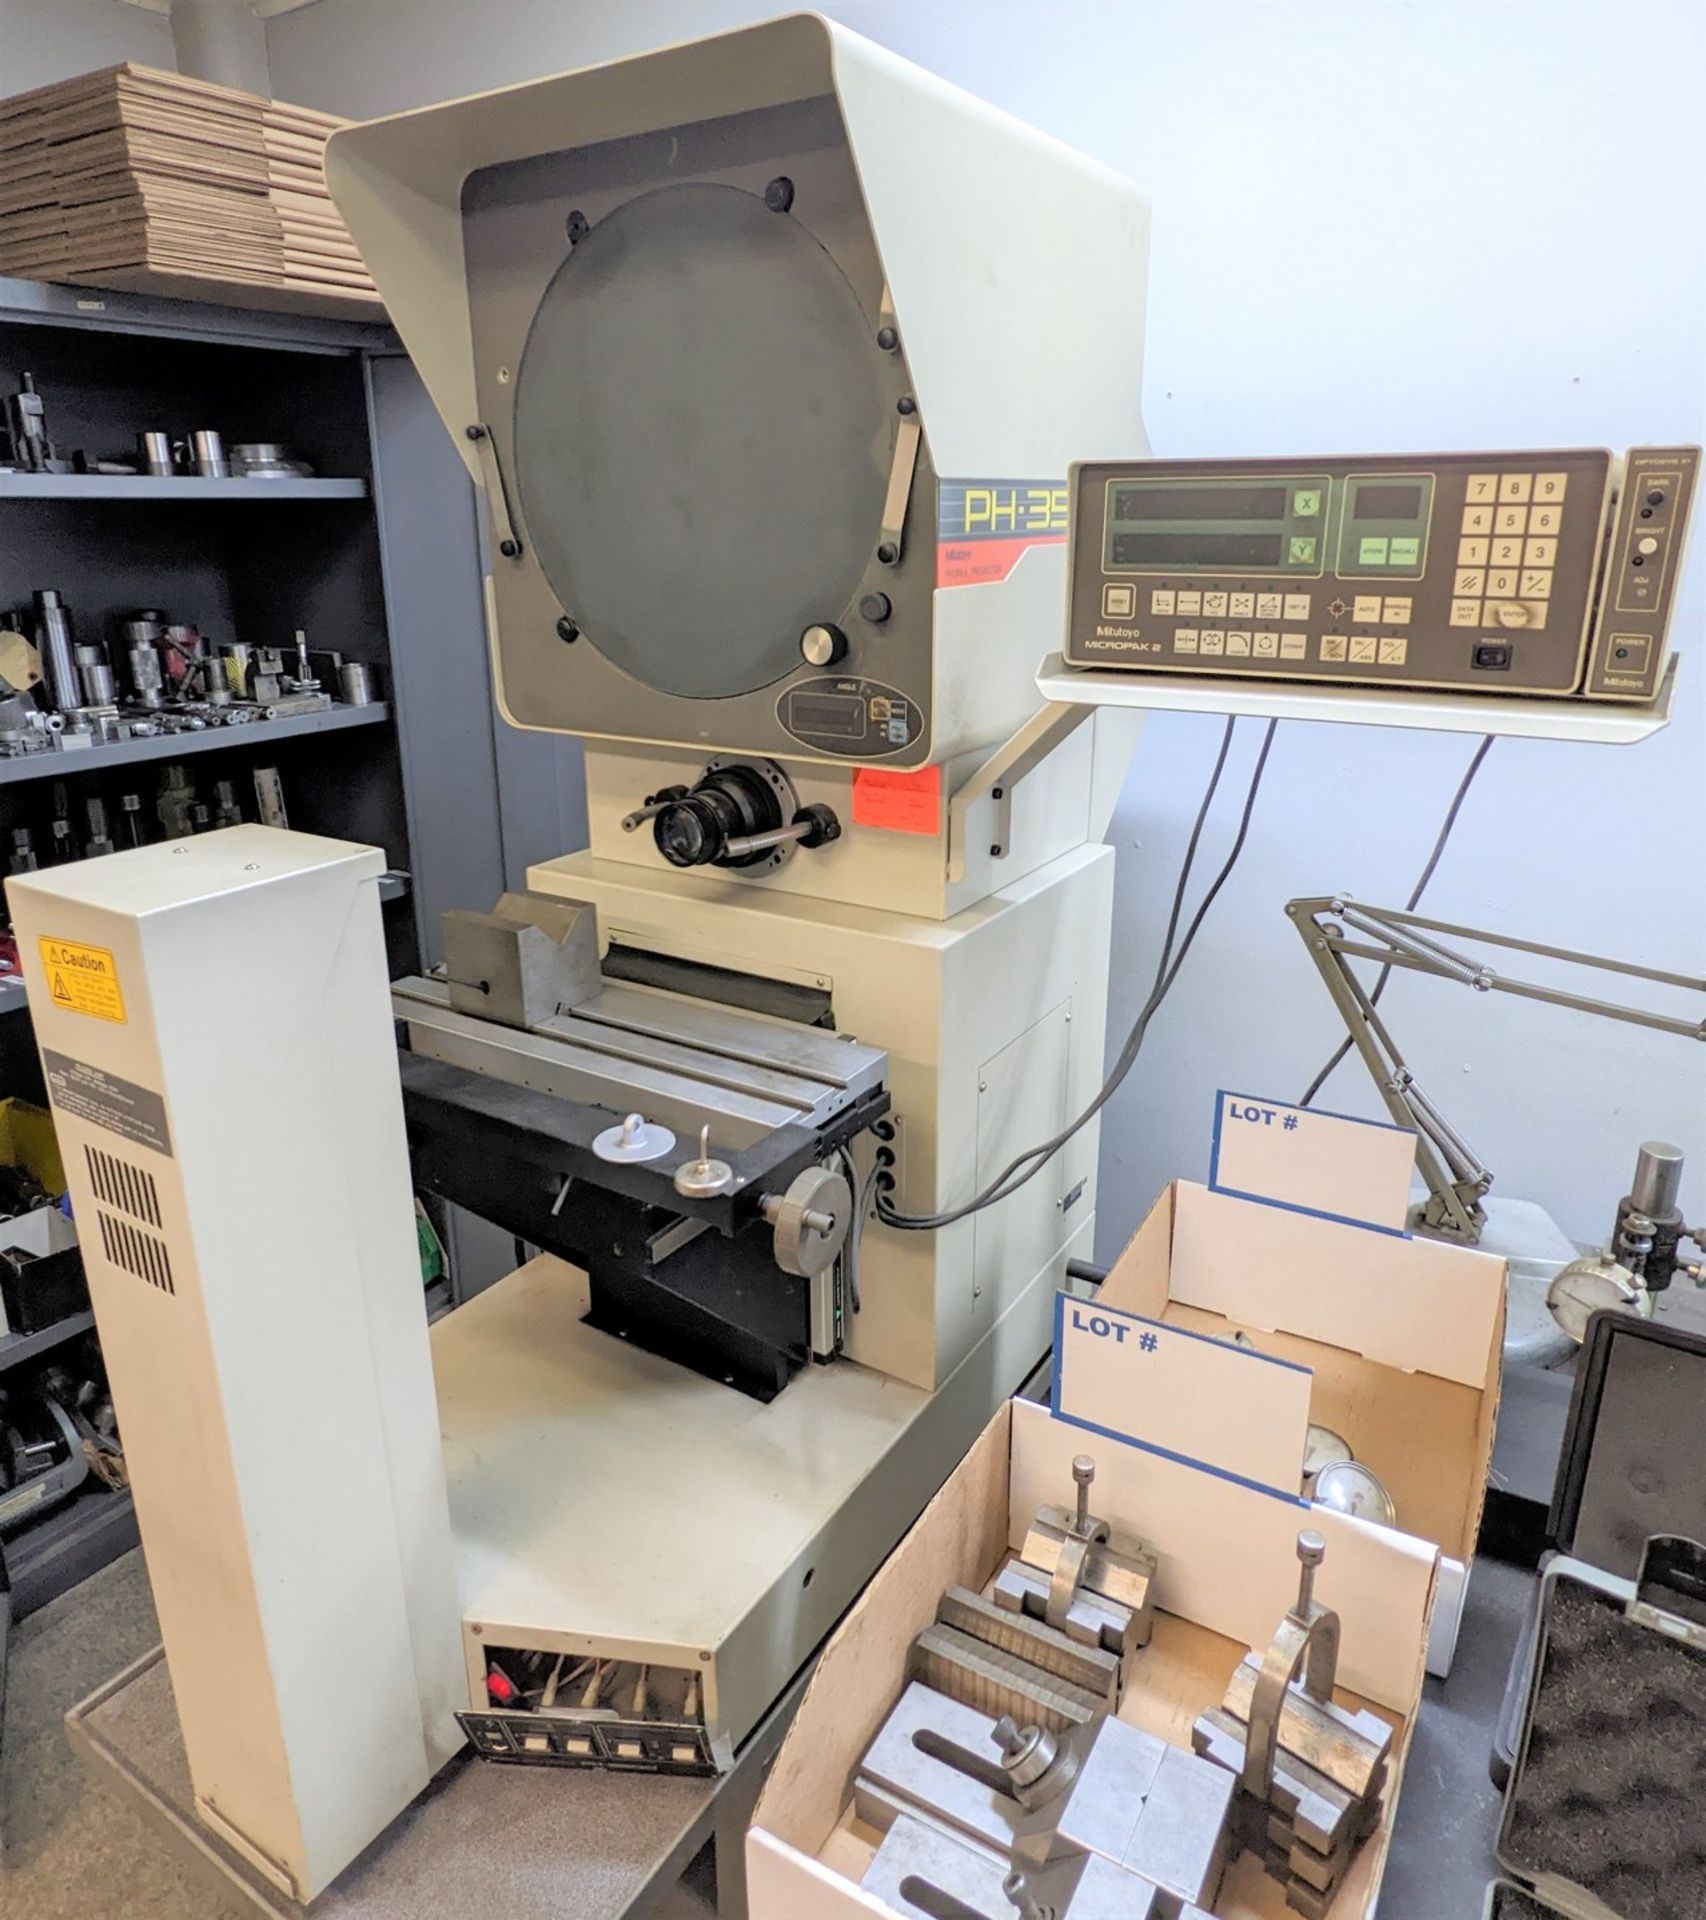 MITUTOYO PH-3500 OPTICAL COMPARATOR, 2-AXIS DRO, S/N 760132